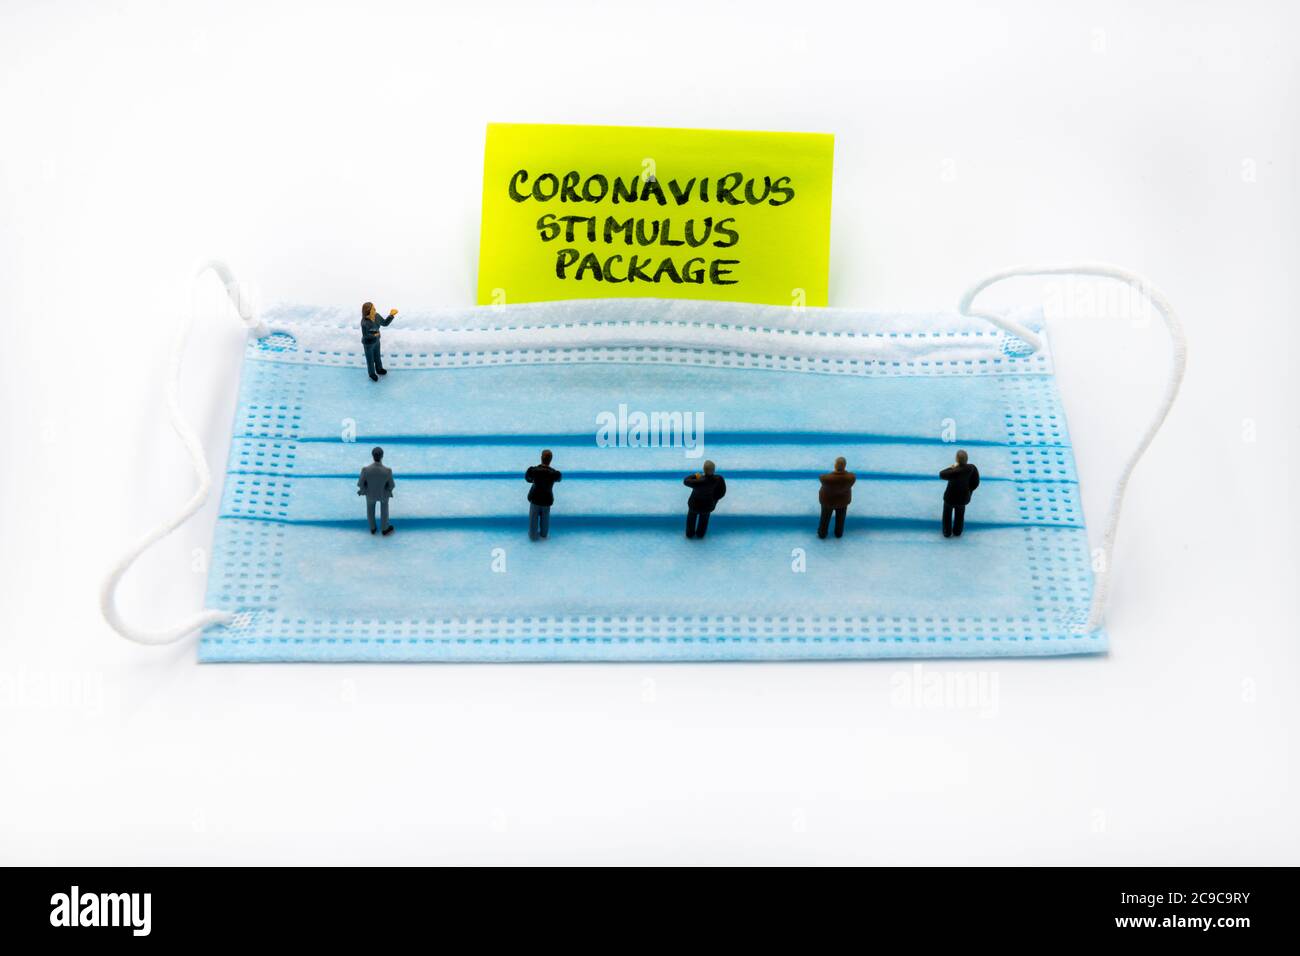 Miniature figurines posed as business people standing socially distanced on medical face mask in a meeting looking at post-it note with Coronavirus Stock Photo